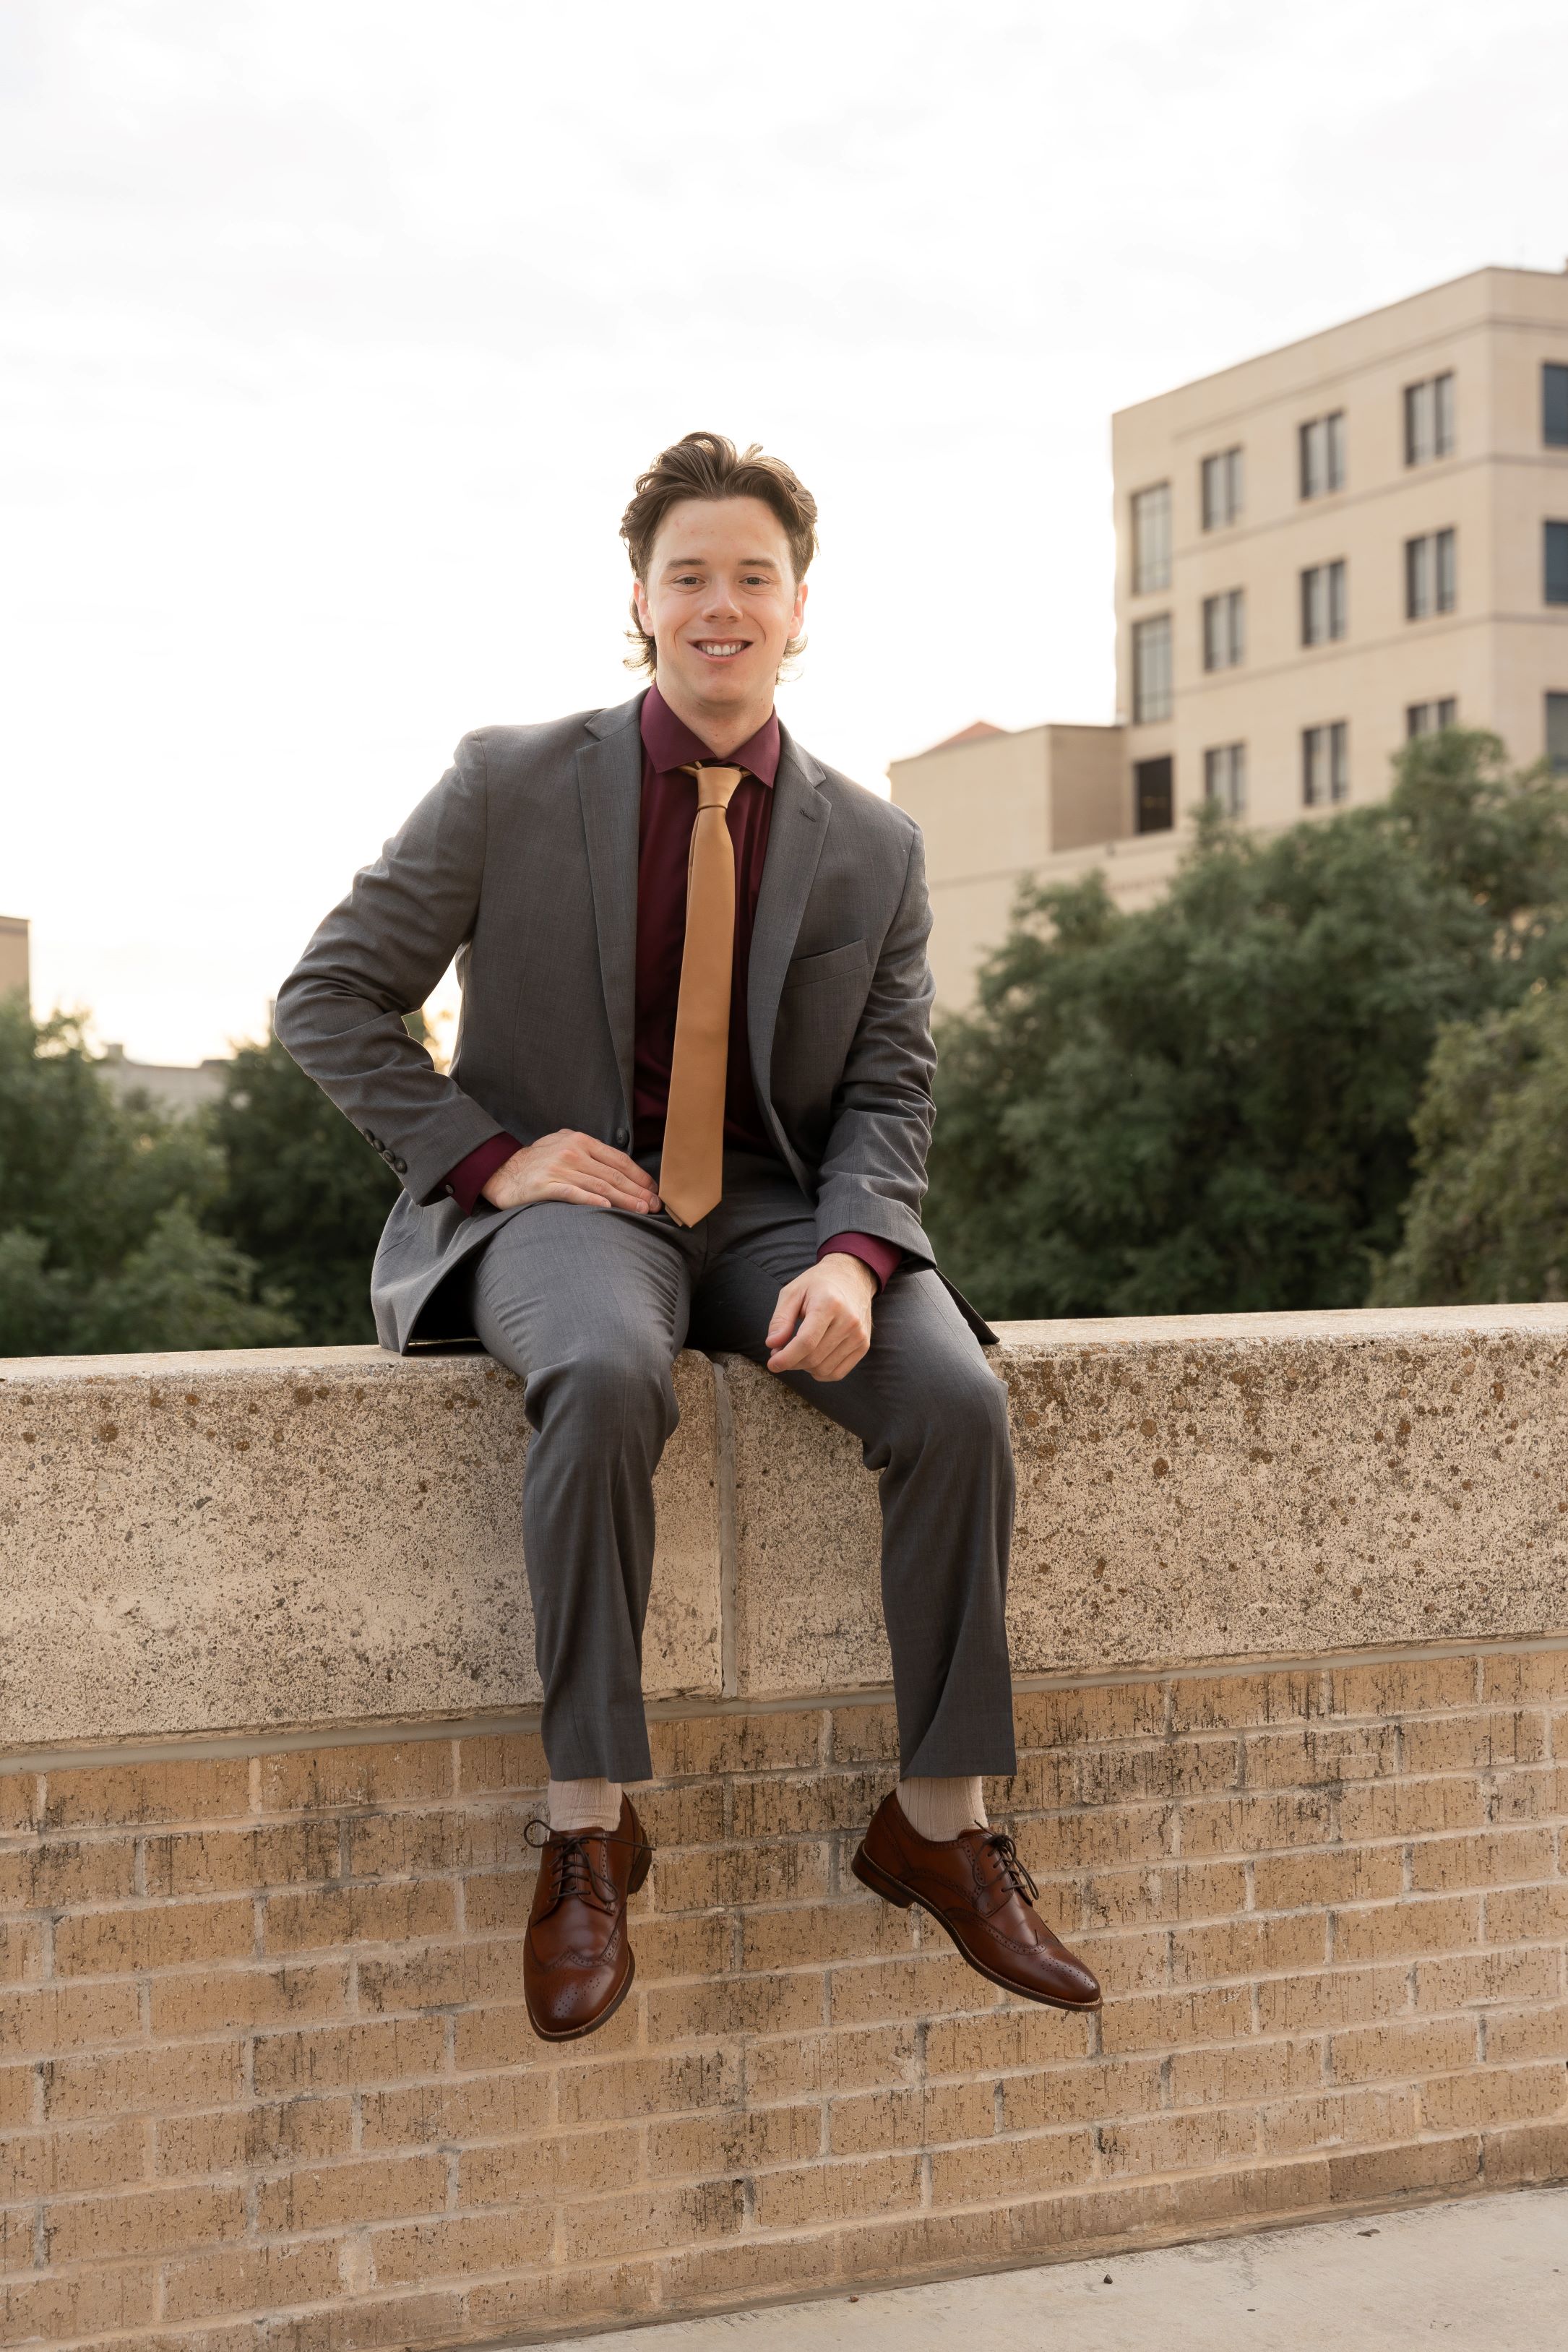 Jack Dressed in a suit and tie posing in a sitting position for graduation pictures